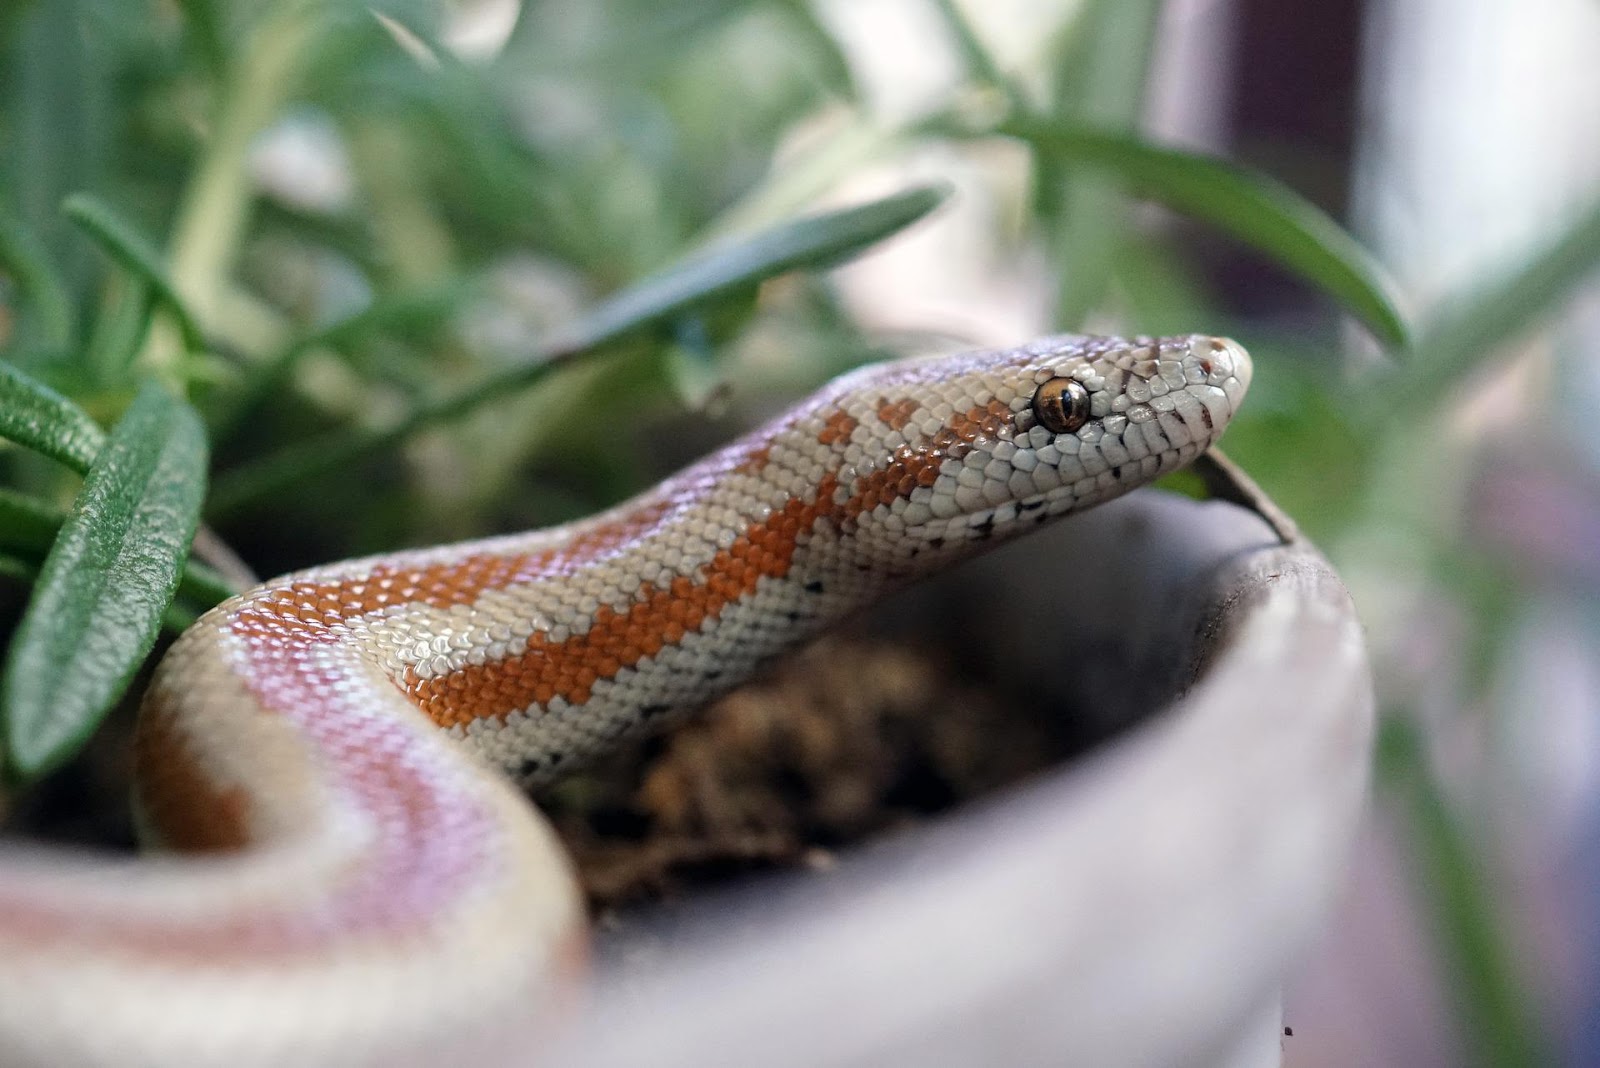 Snake in potted plant container